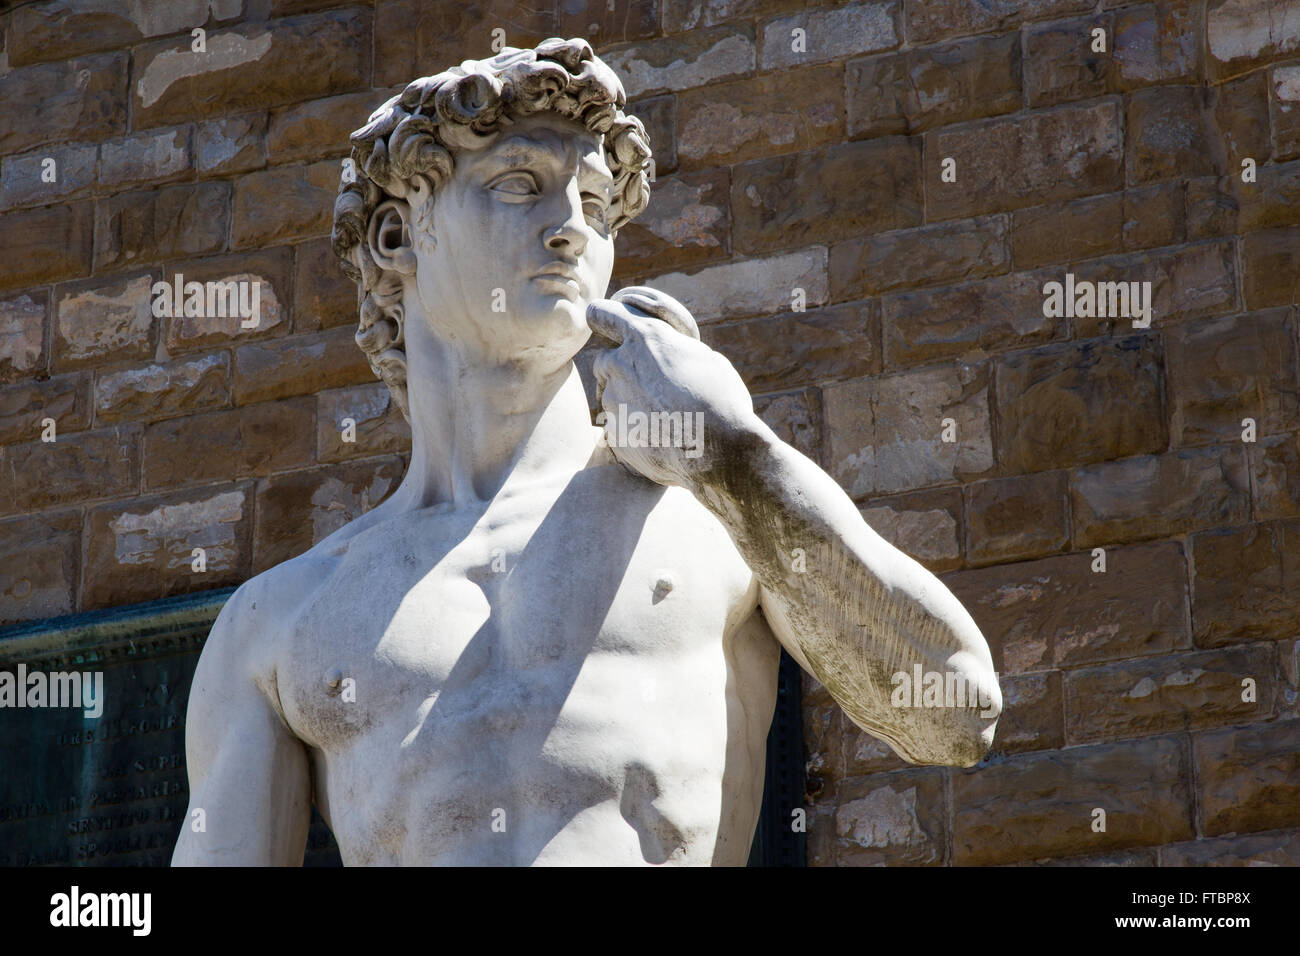 Copy of the statue of David by Michelangelo In the Piazza della Signoria, Florence, Italy. Stock Photo